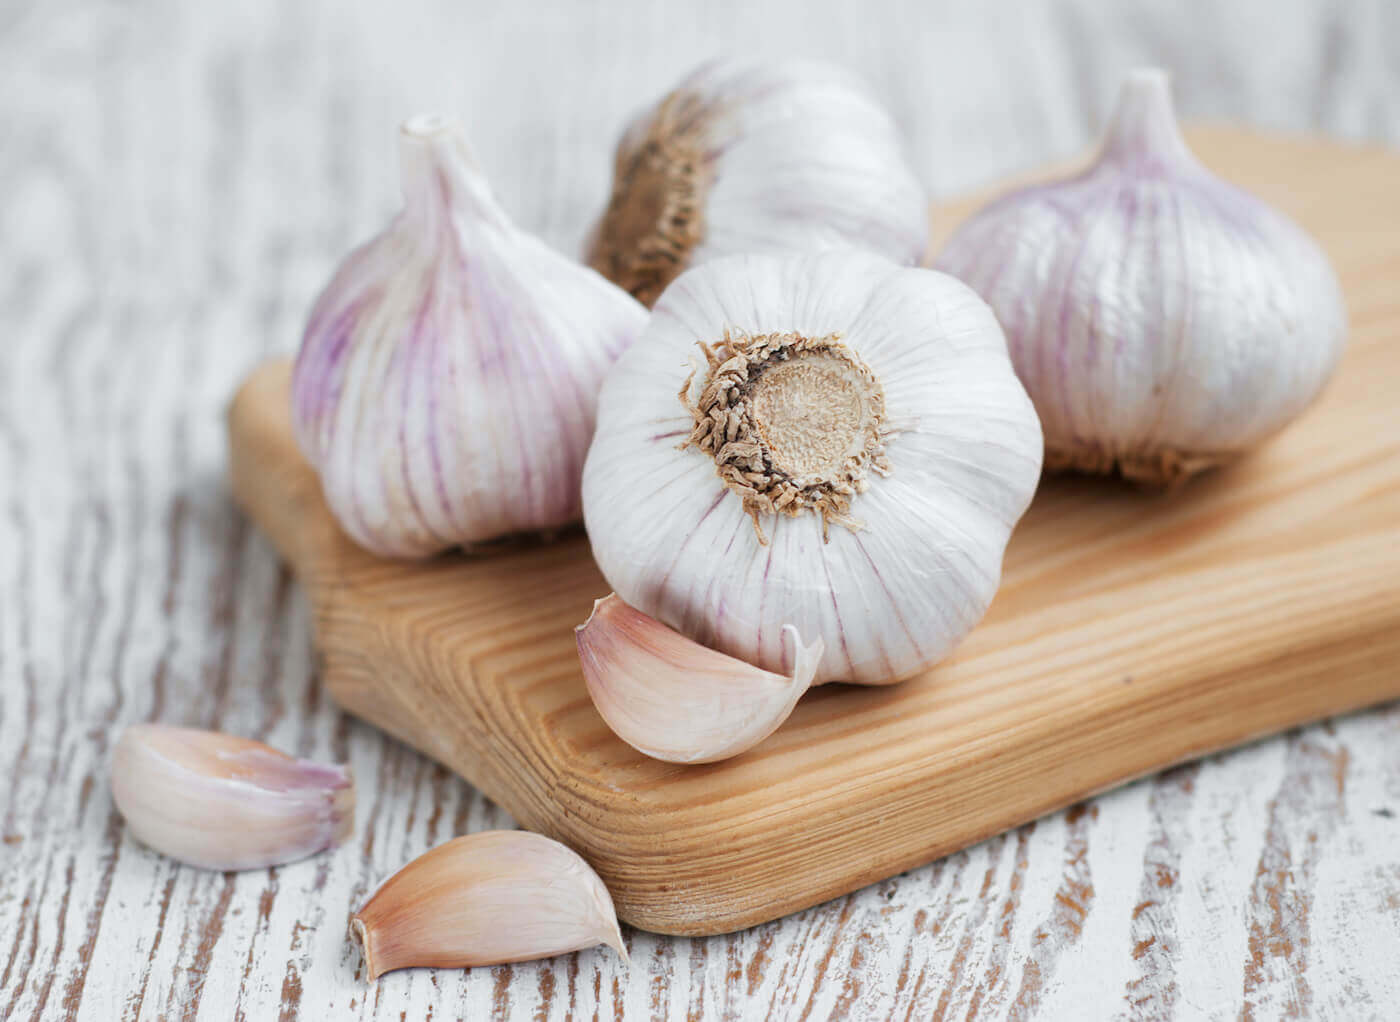 Minced Garlic Vs. Garlic Powder: What's The Difference?